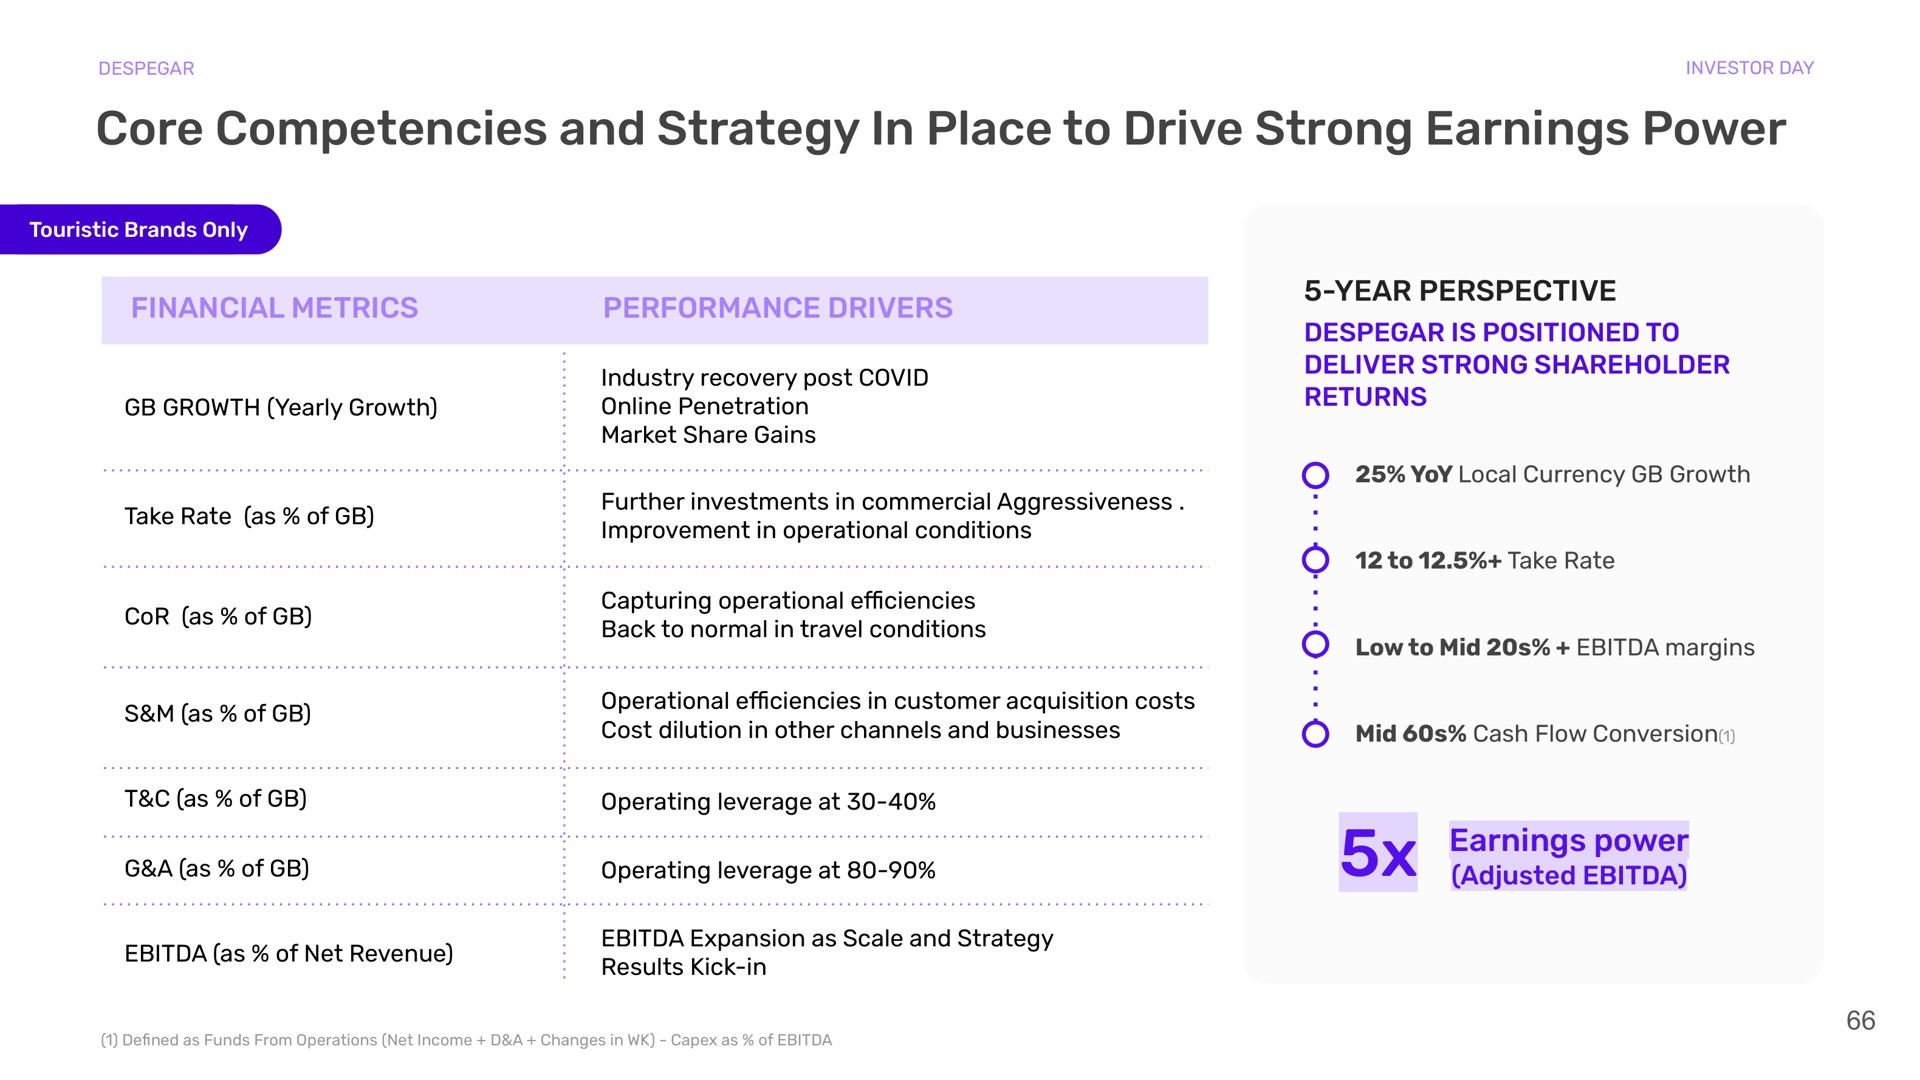 core competencies and strategy in place to drive strong earnings power financial metrics performance drivers year perspective is positioned to deliver strong shareholder returns earnings power adjusted | Despegar